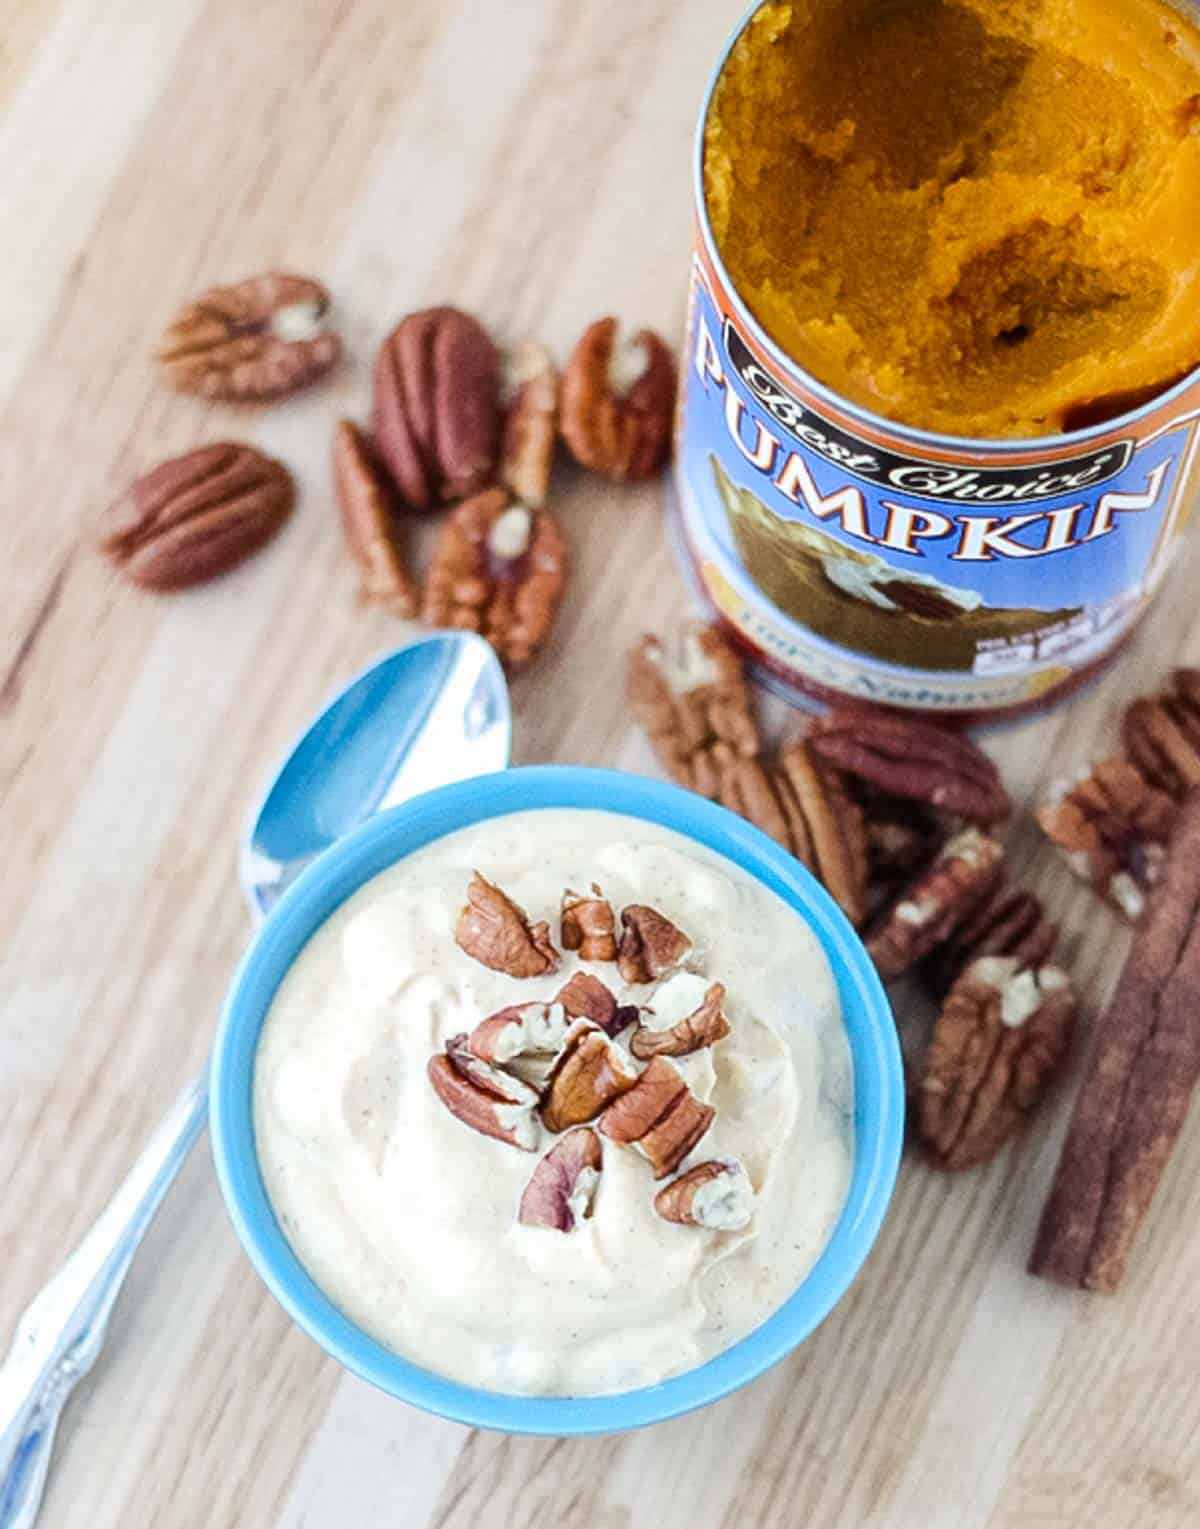 silver spoon and blue bowl of pumpkin yogurt topped with pecans on a wooden counter surrounded by pecans and open can of pumpkin puree